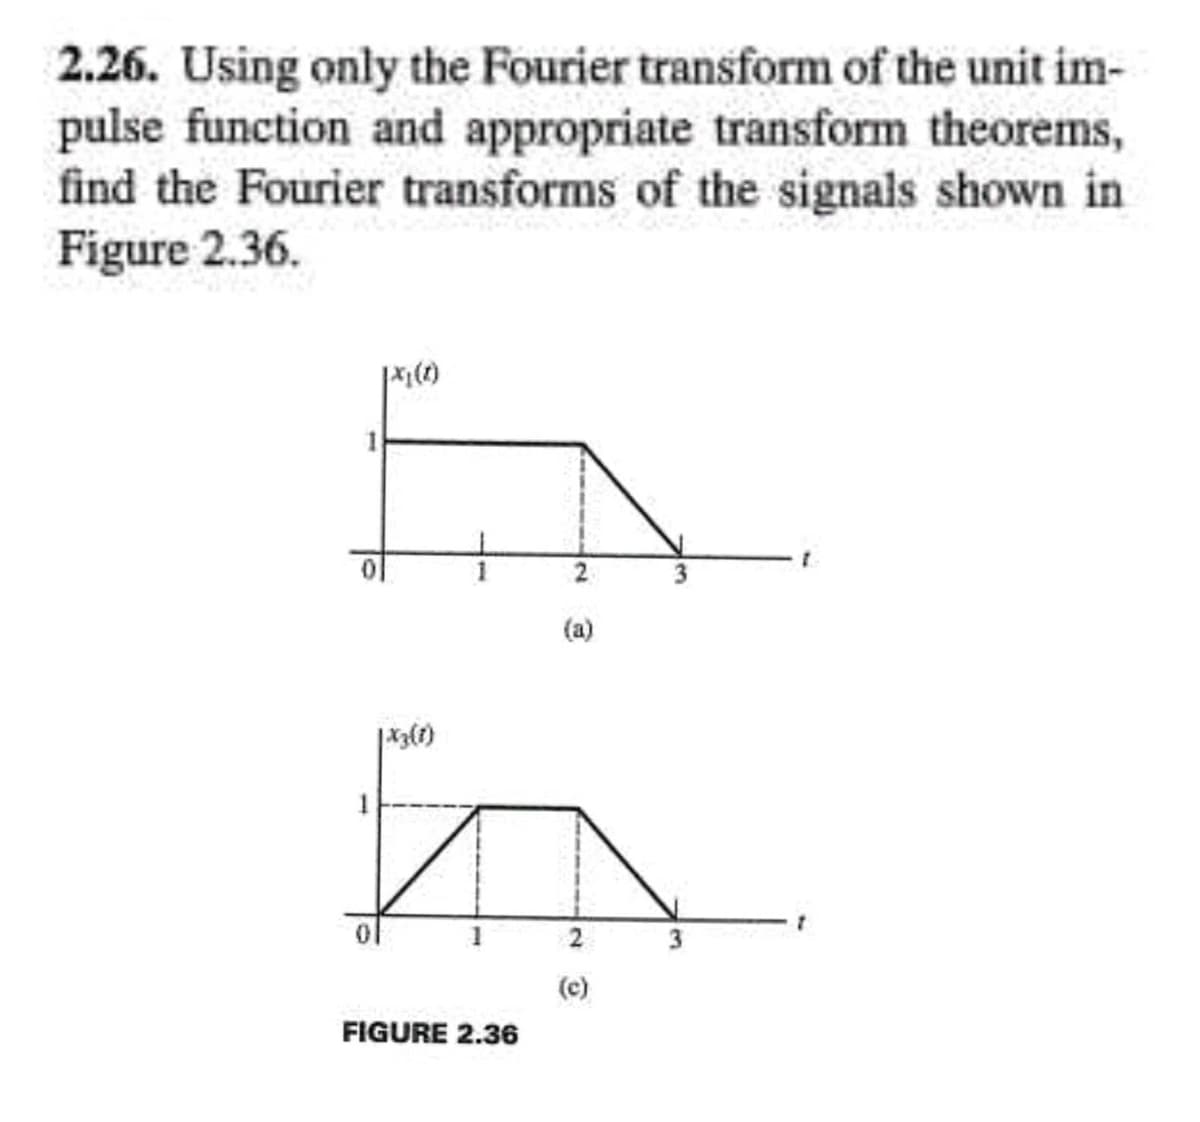 2.26. Using only the Fourier transform of the unit im-
pulse function and appropriate transform theorems,
find the Fourier transforms of the signals shown in
Figure 2.36.
(a)
(e)
FIGURE 2.36
